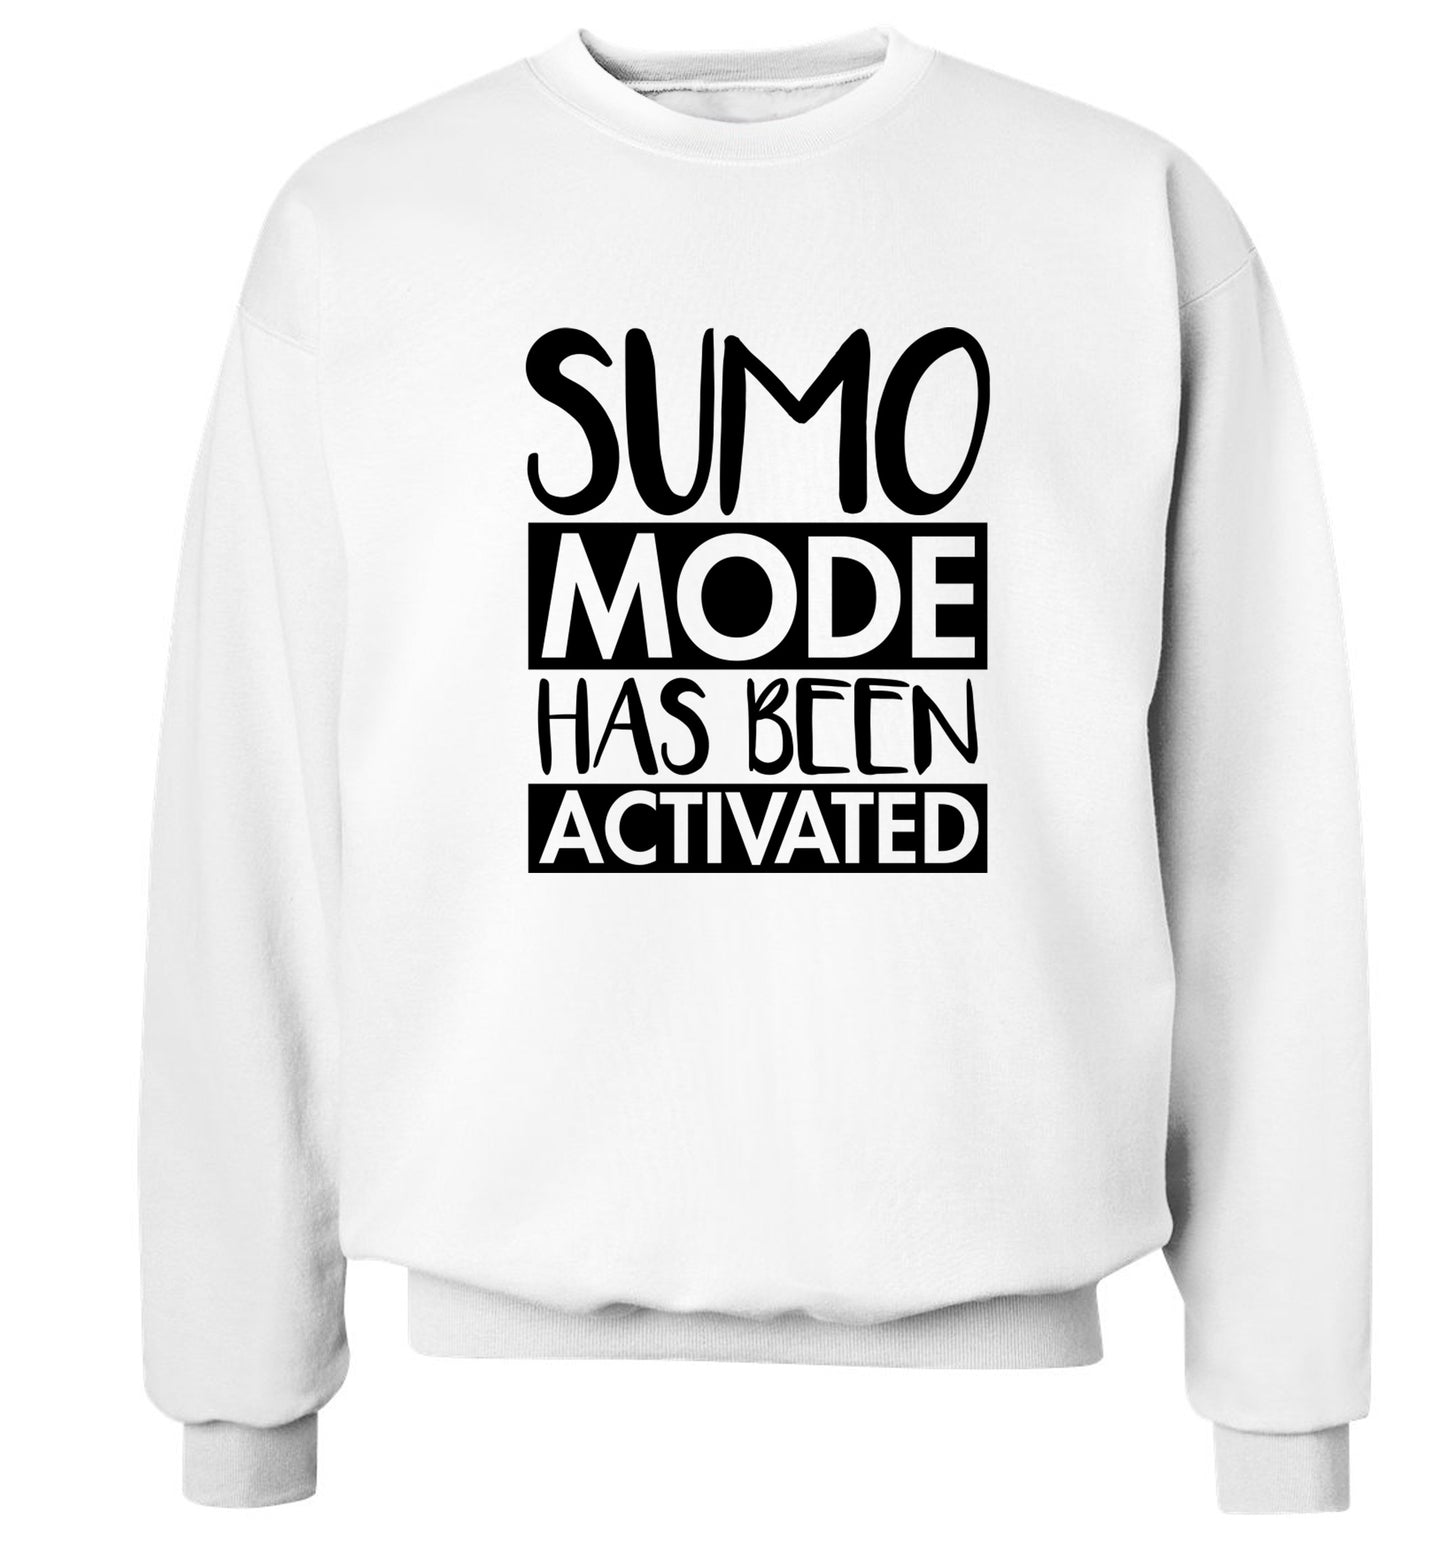 Sumo mode activated Adult's unisex white Sweater 2XL